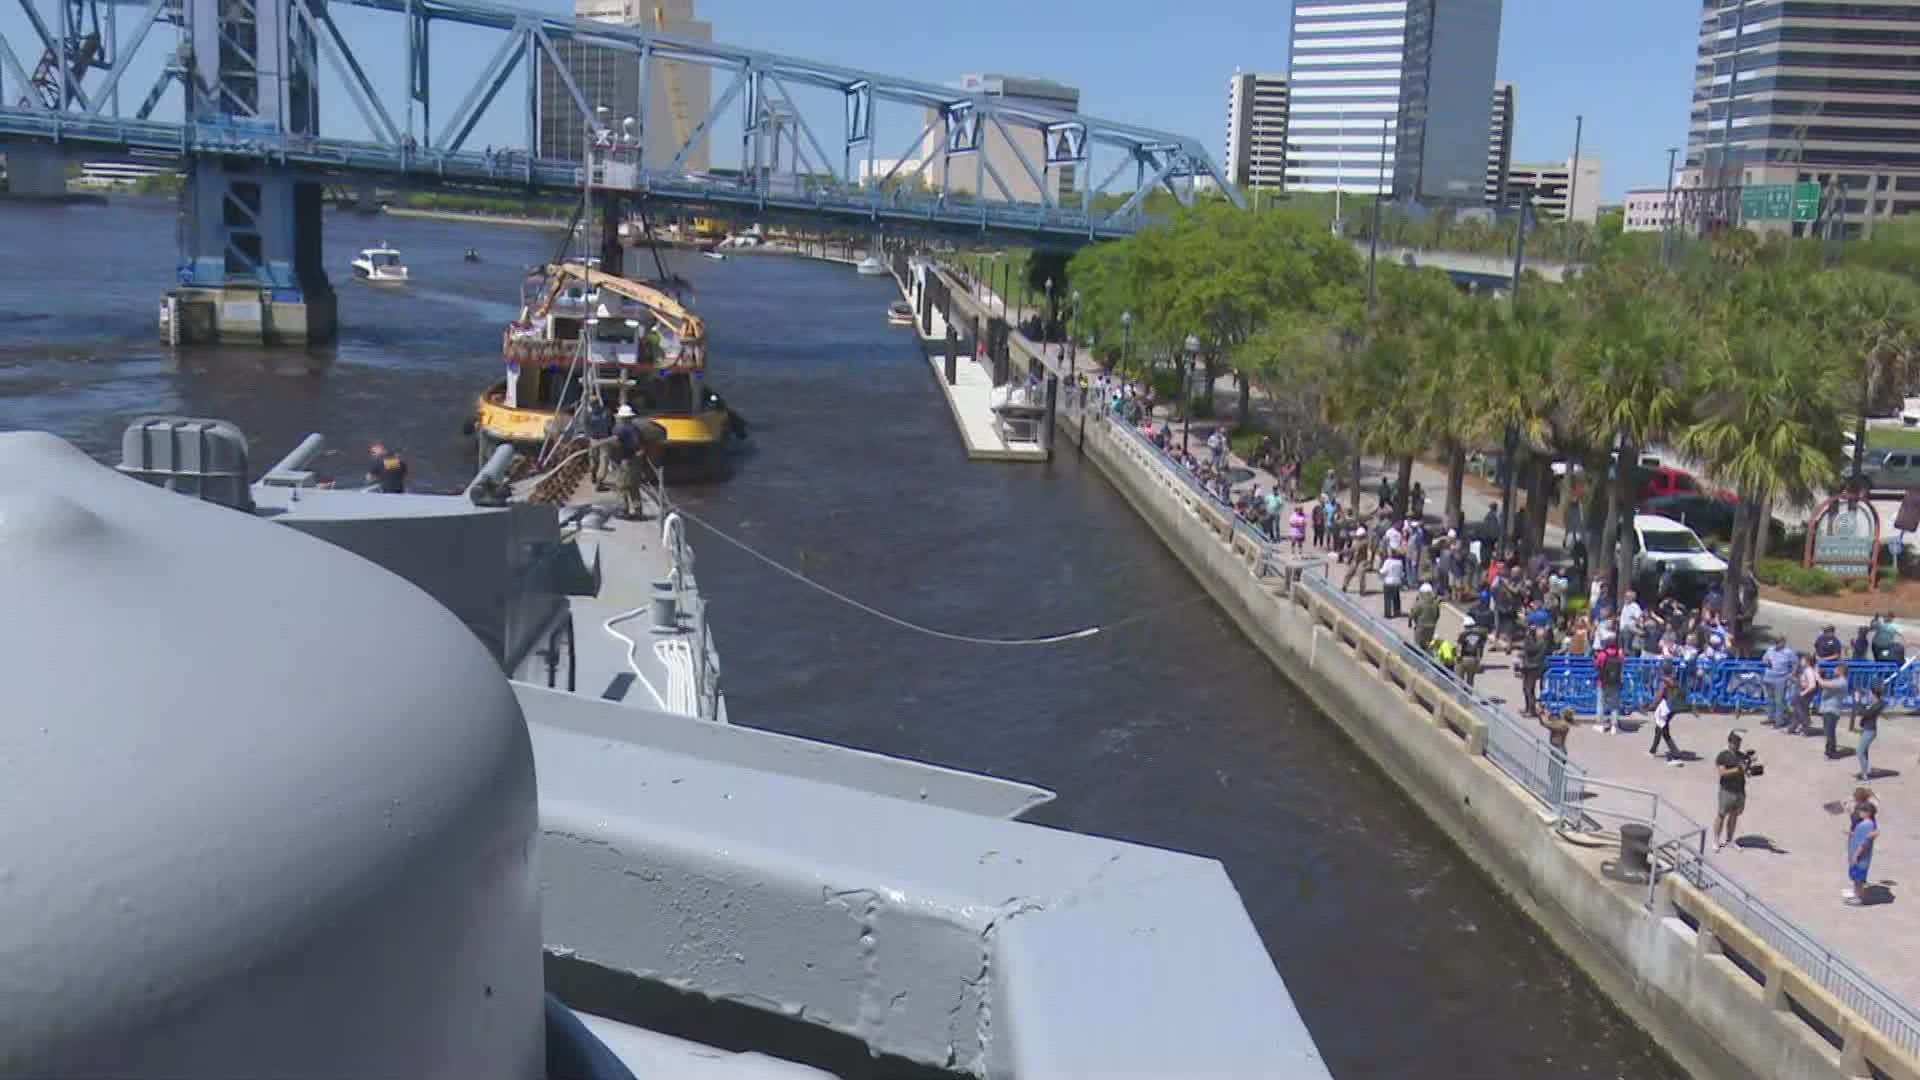 One of the most decorated ships in the history of the U.S. Navy, the vessel will be the featured piece of the Jacksonville Naval Museum.